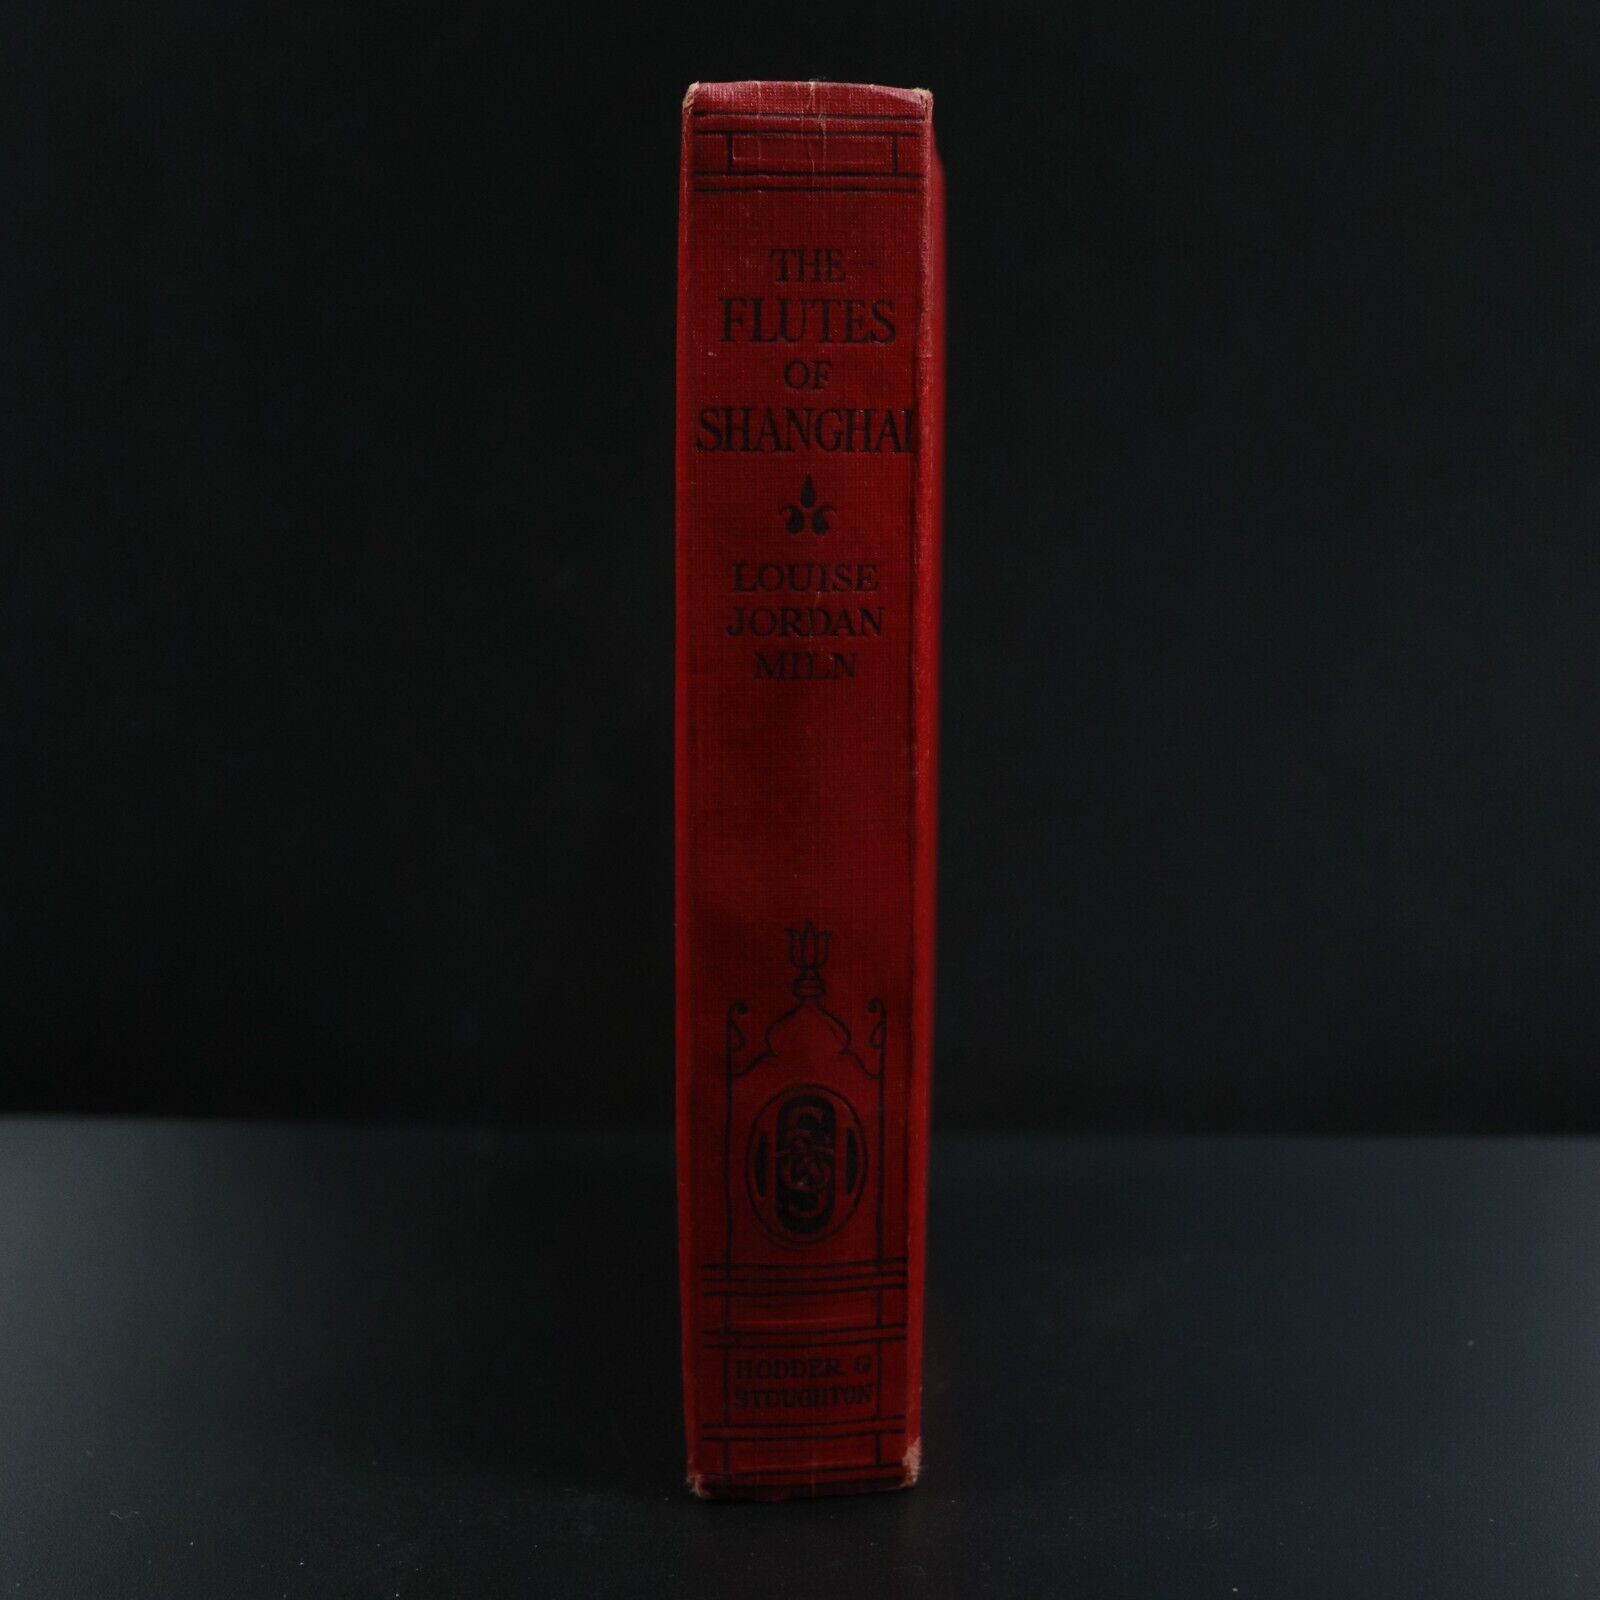 1928 The Flutes Of Shanghai by Louise Jordan Miln Antique American Fiction Book